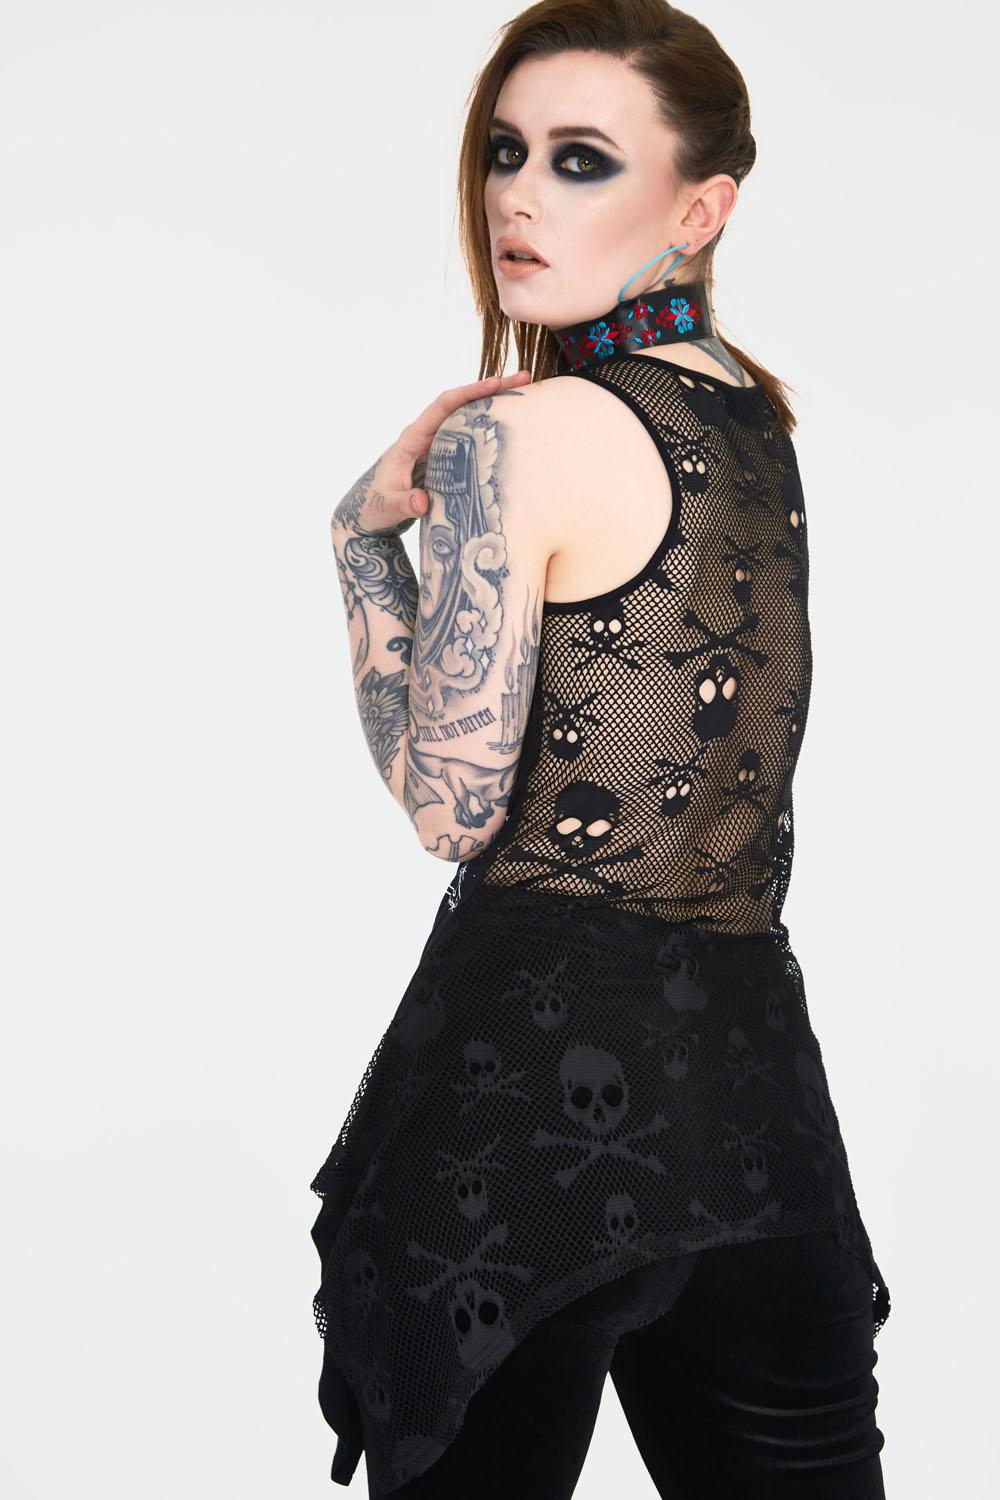 Cosmic cat longline sleevles top with back mesh | Alternative Clothing ...